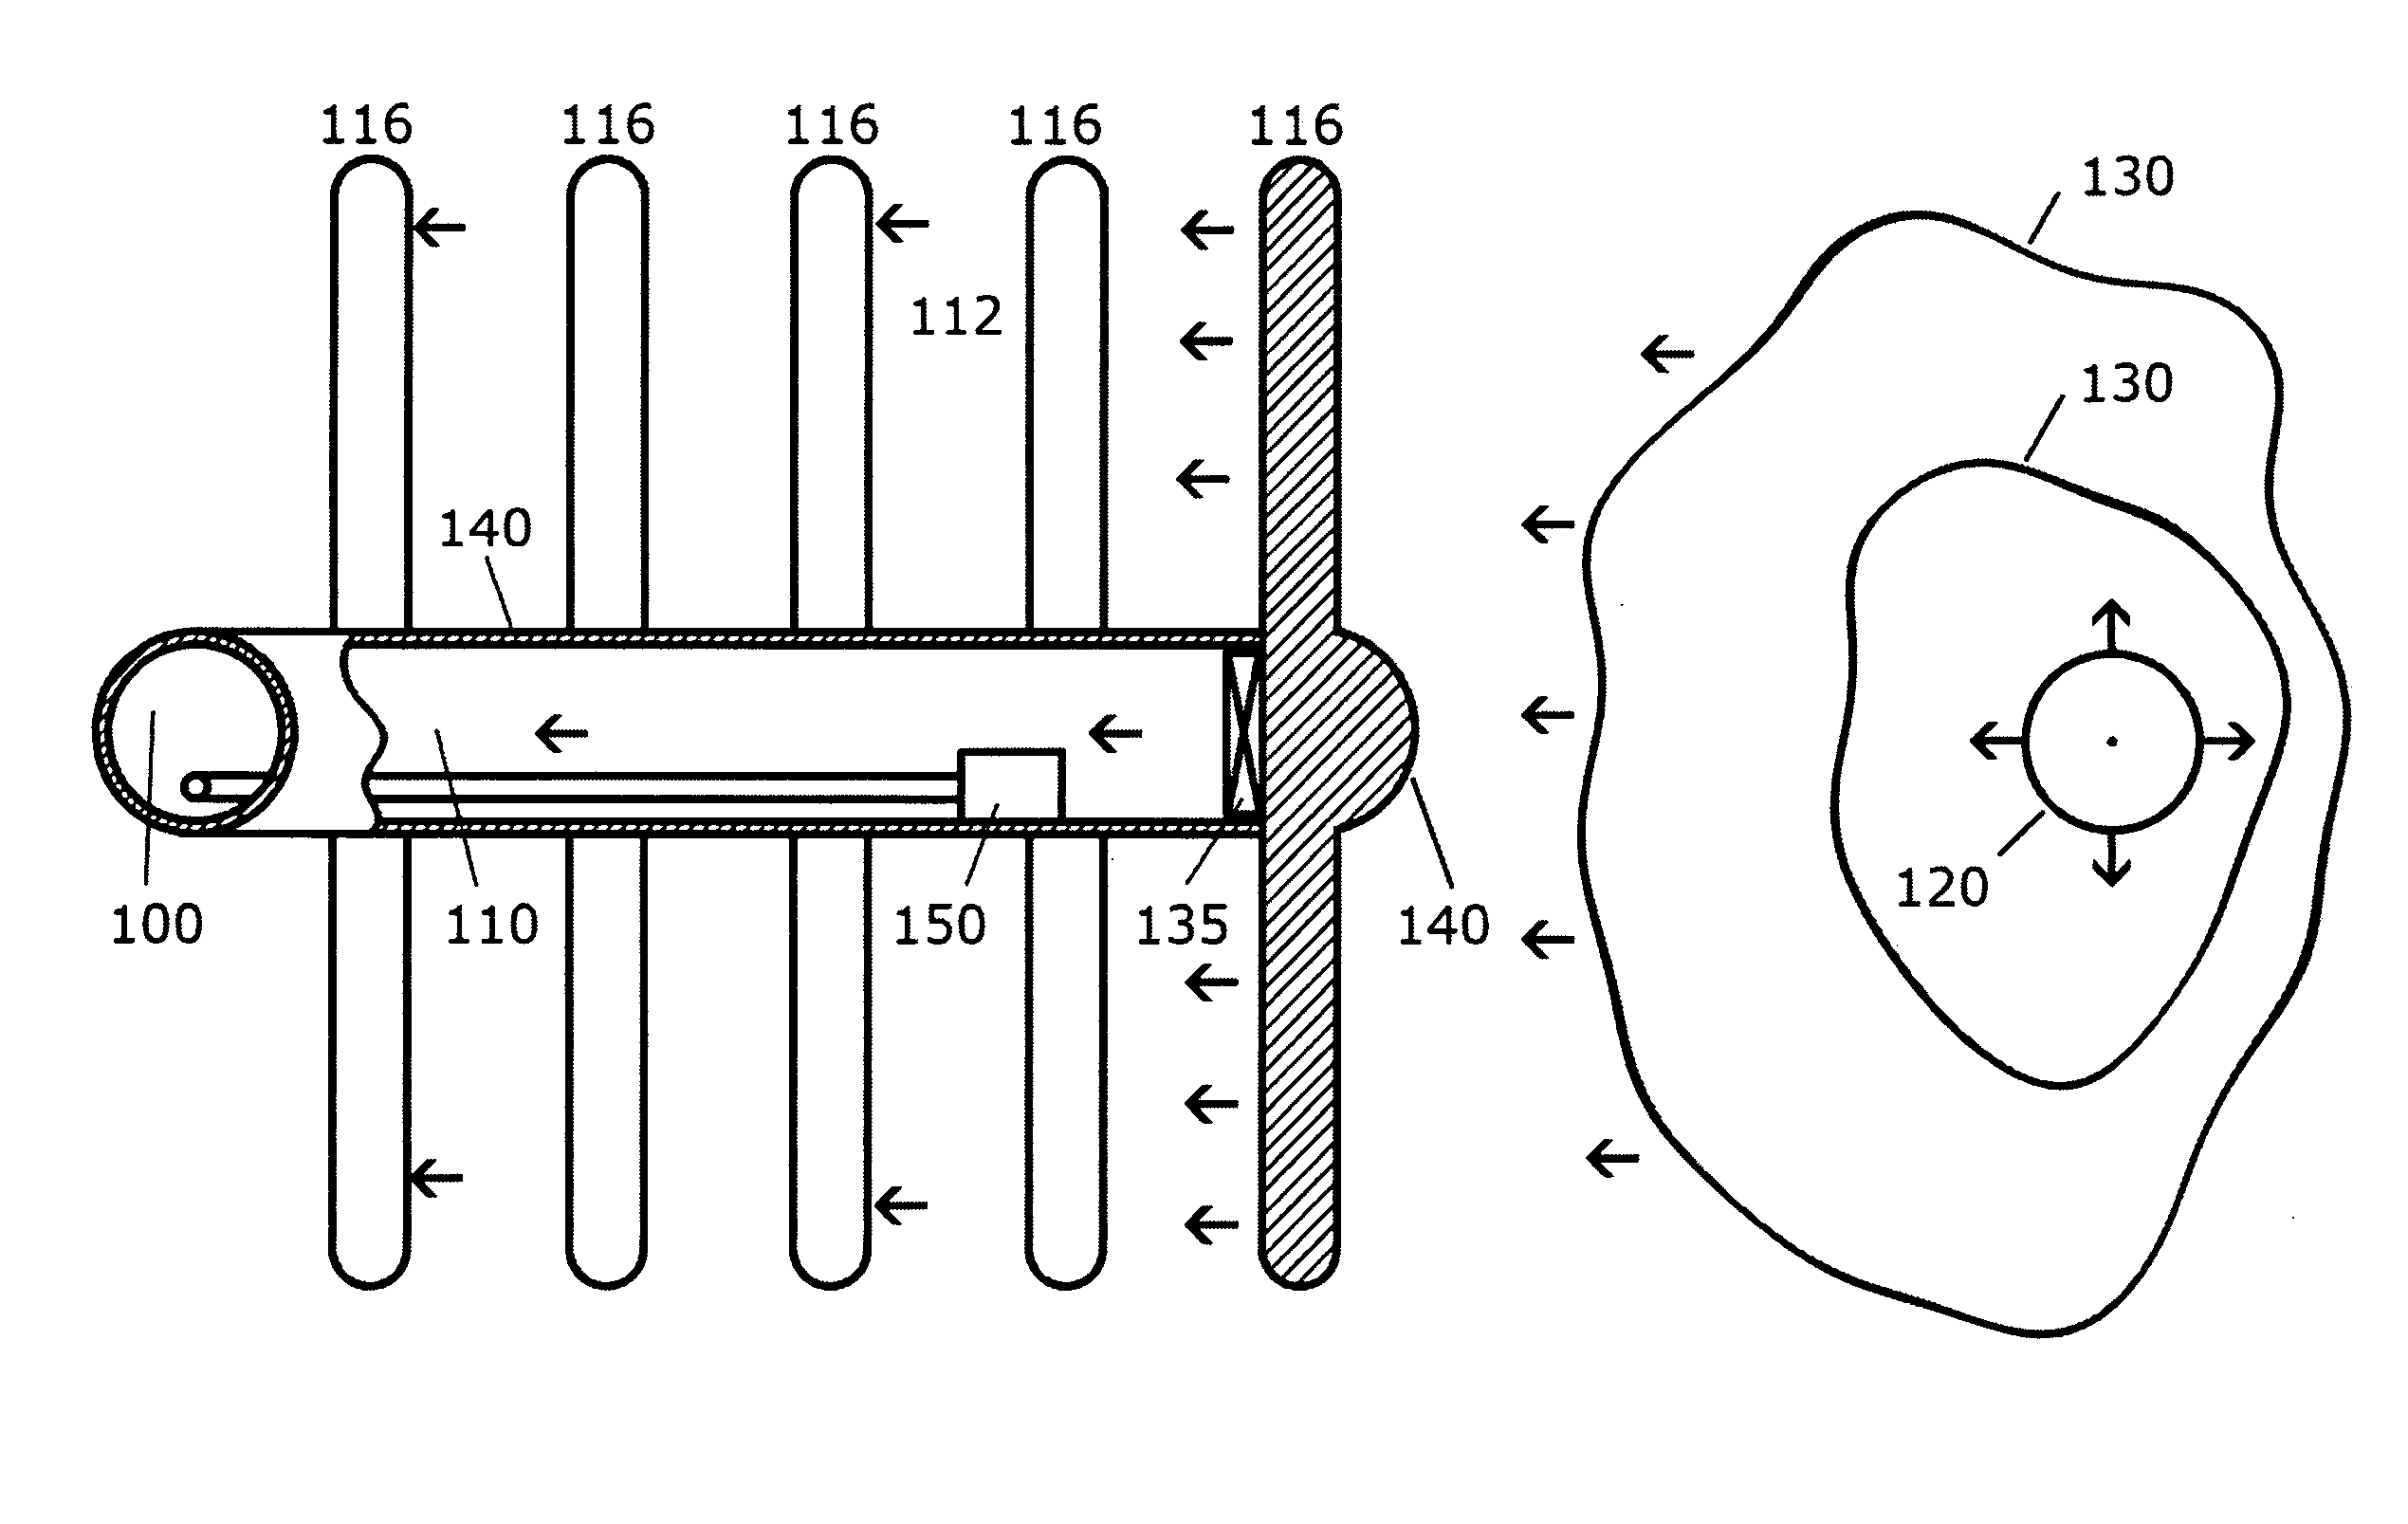 Method of improving waterflood performance using barrier fractures and inflow control devices